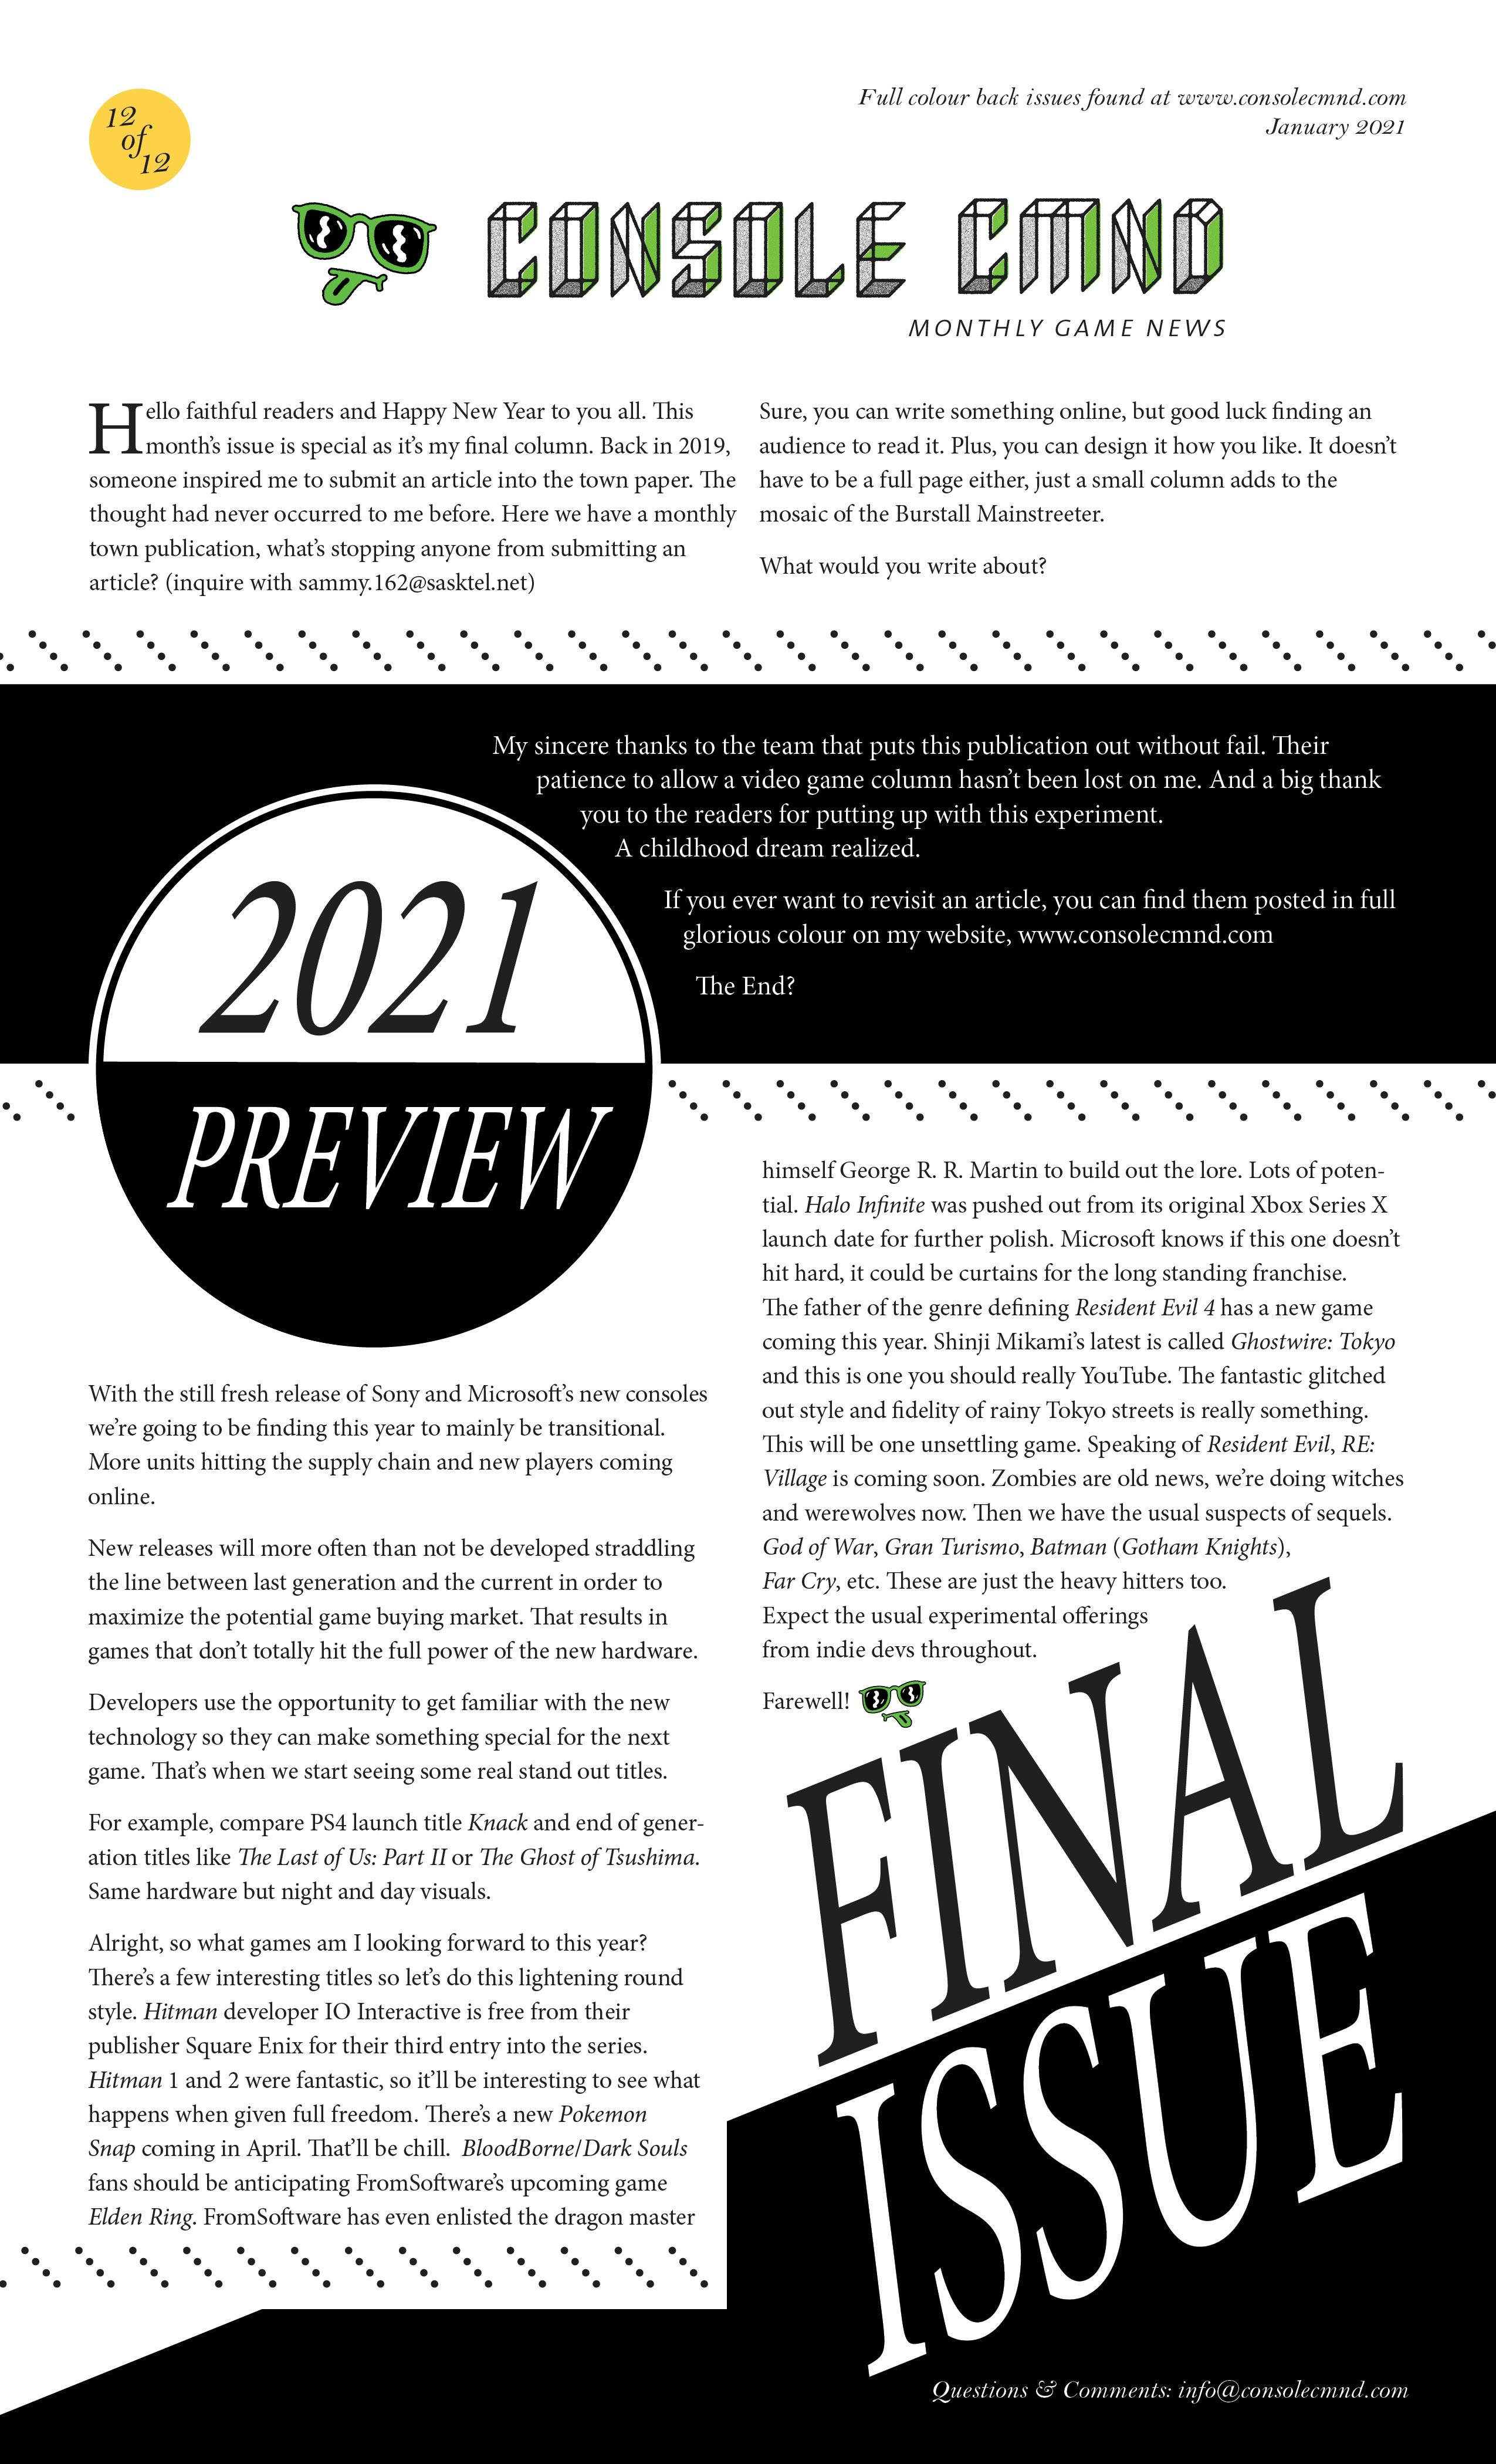 January 2021 - Final Issue - Year in Preview